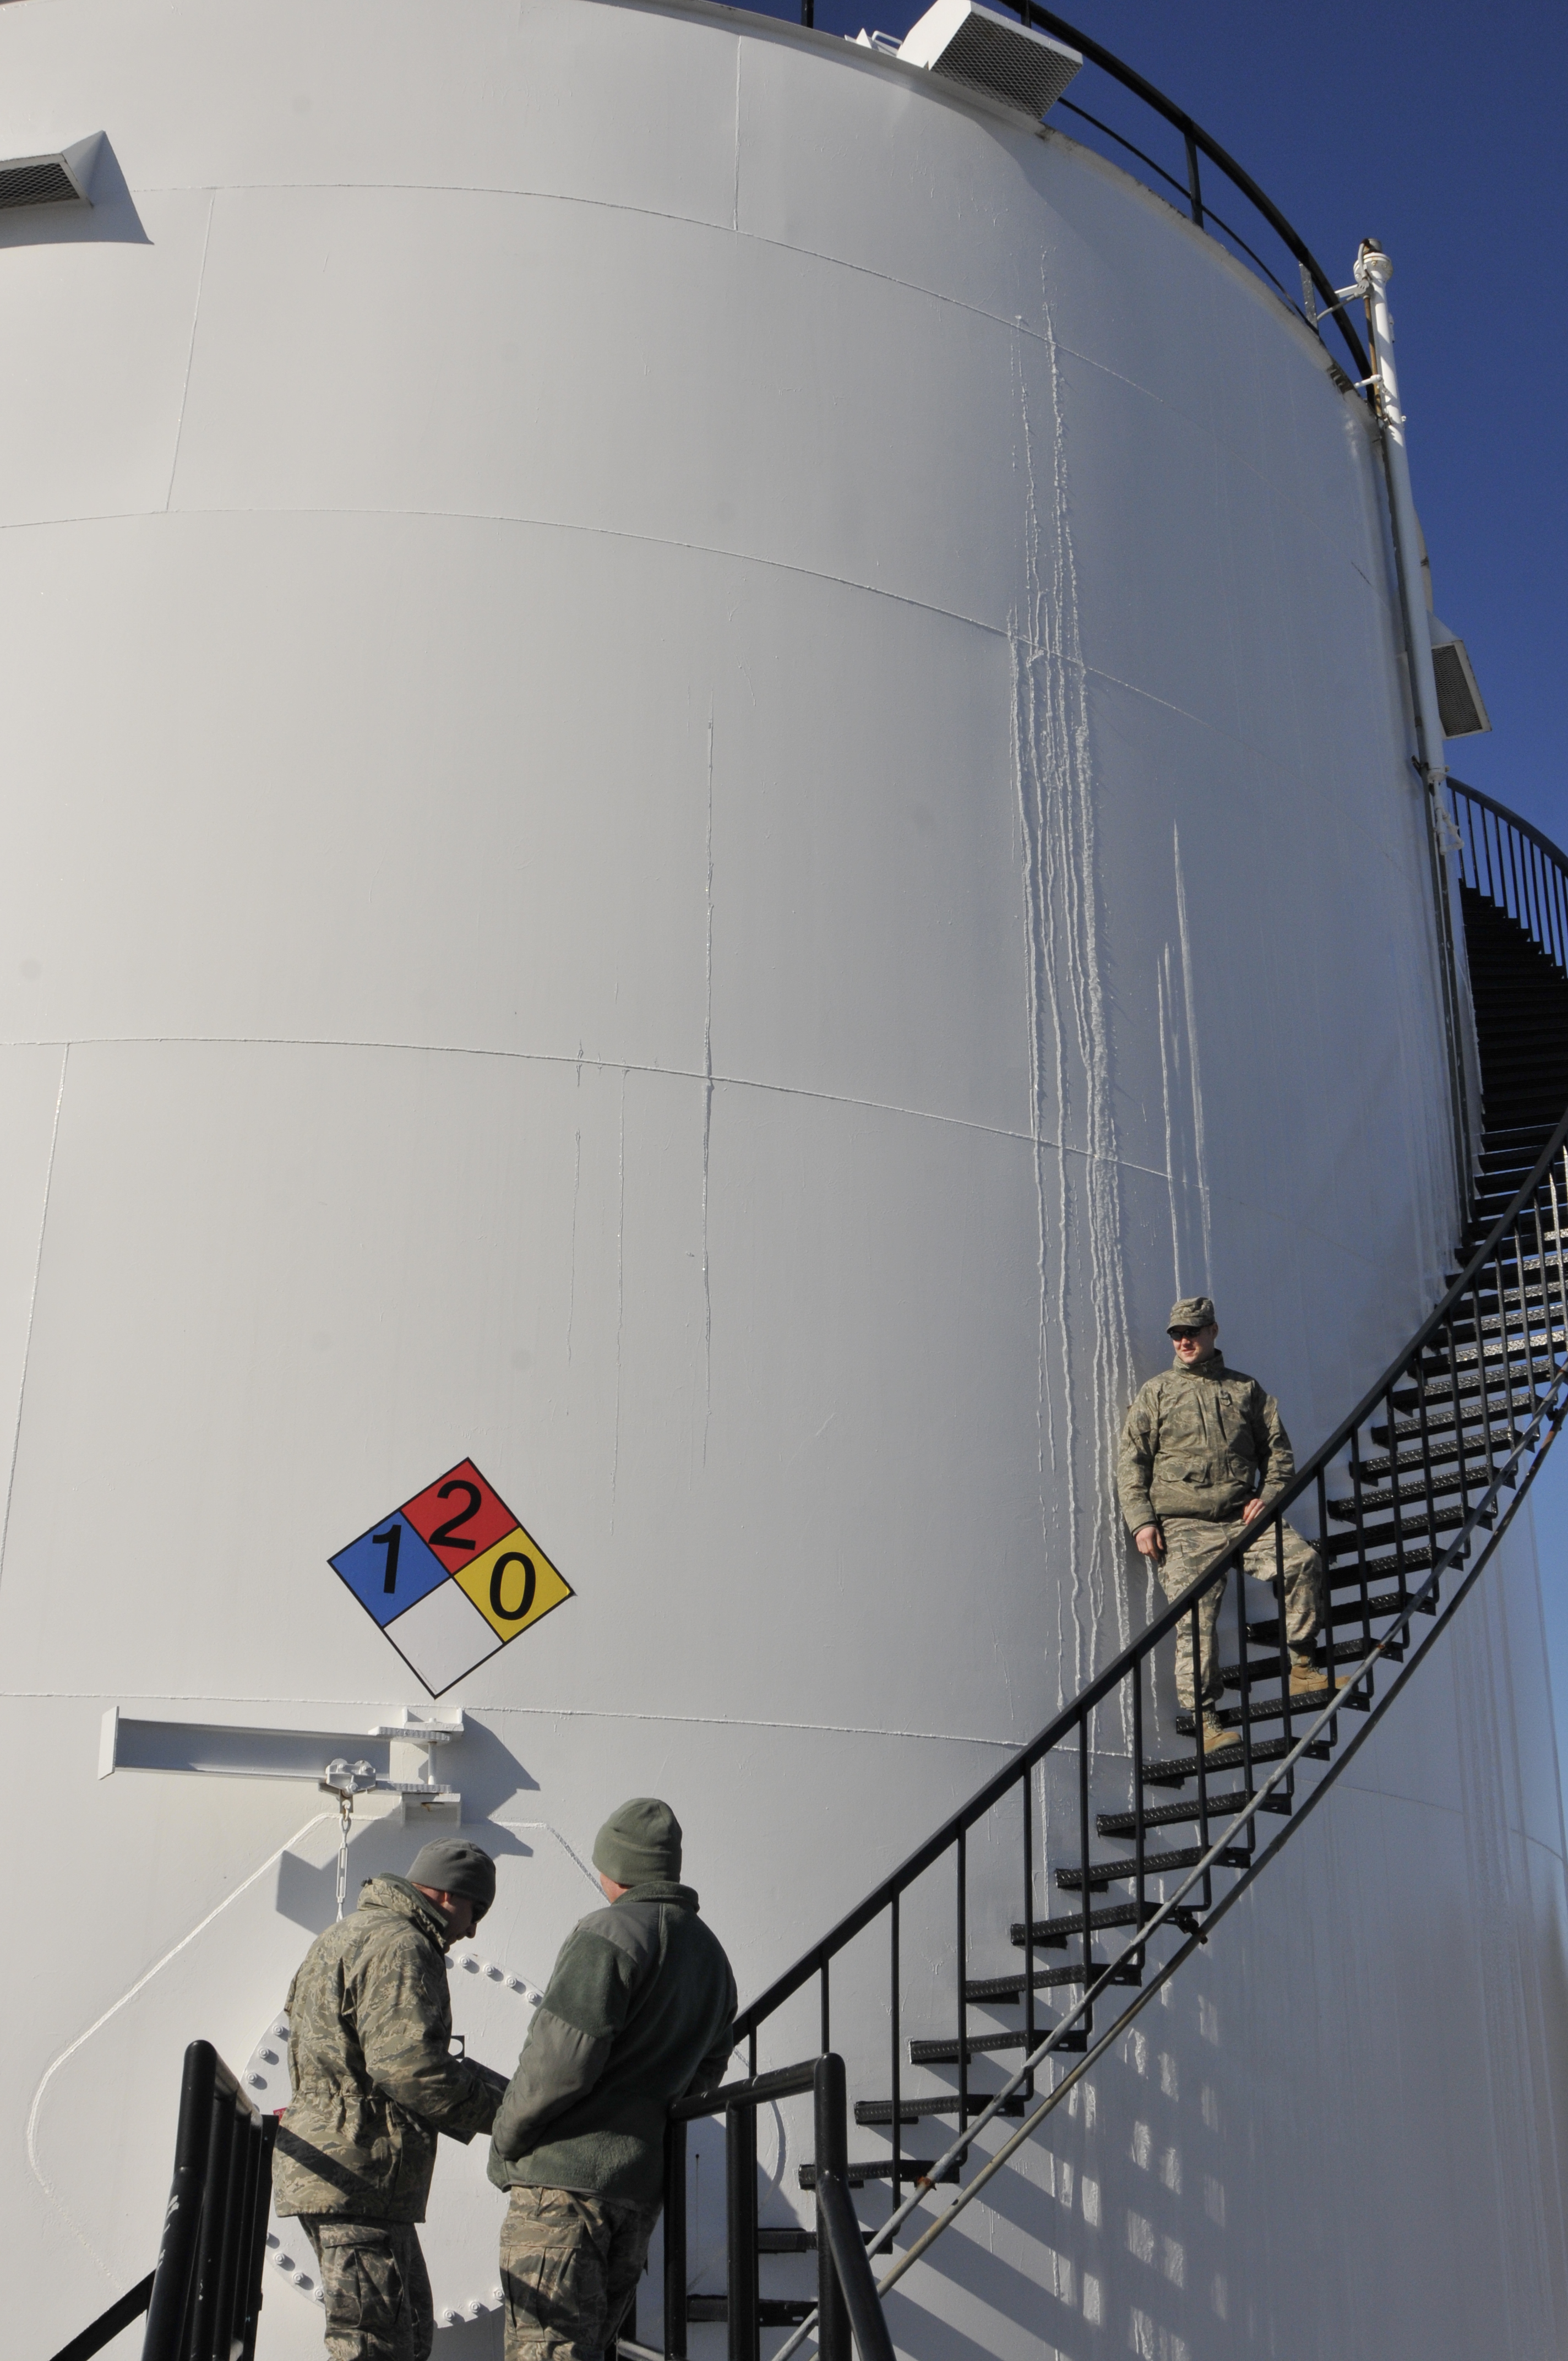 A Bangor, Maine, fuel tank being inspected